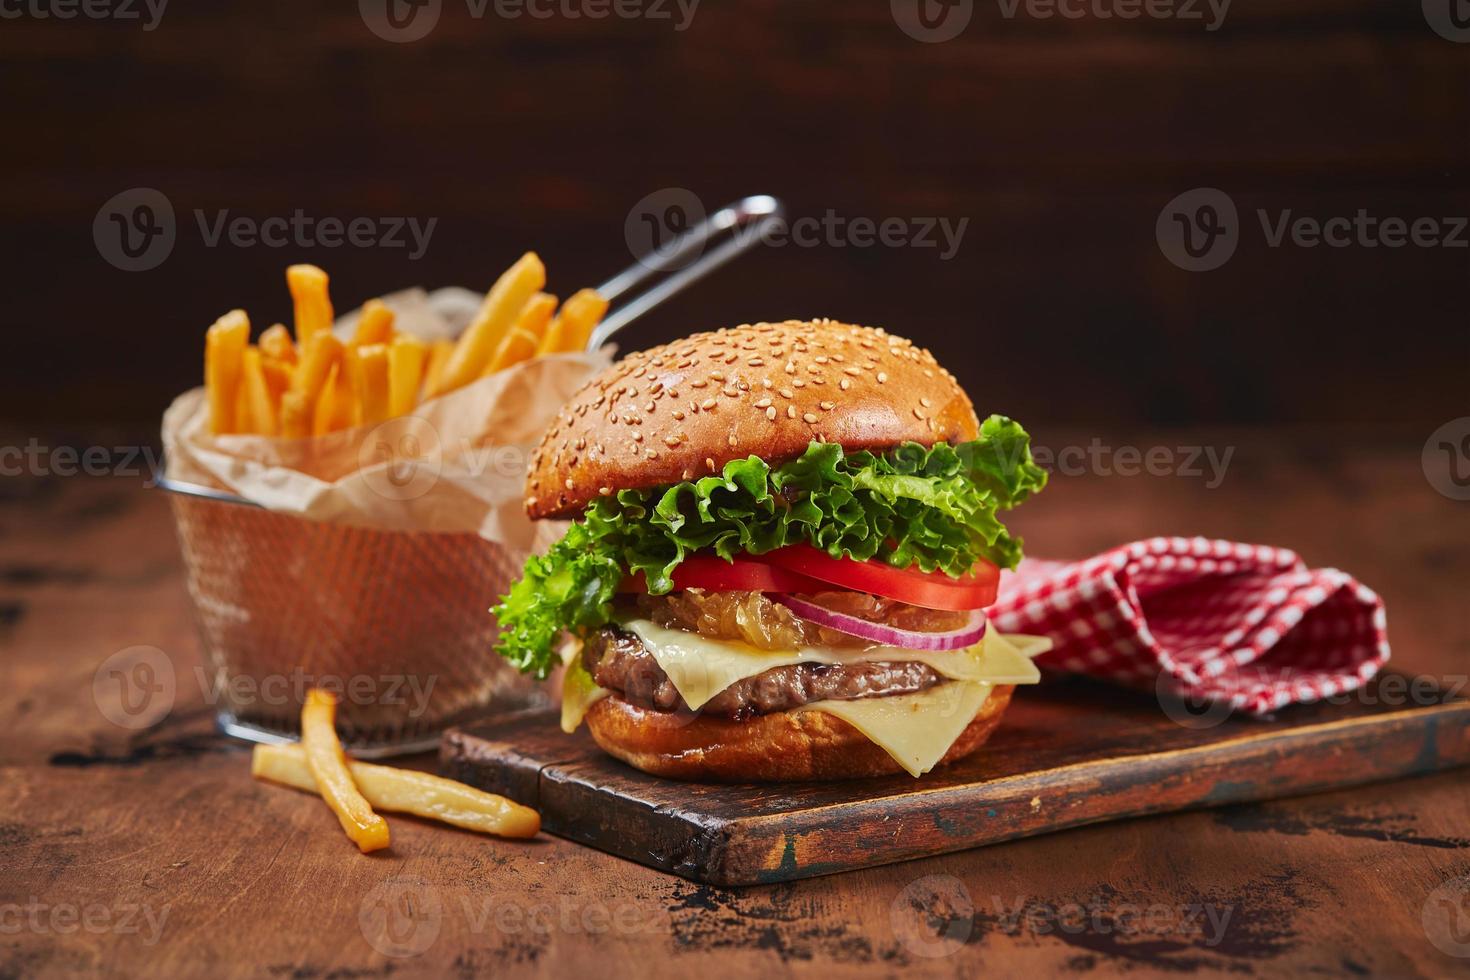 Homemade burger with beef, cheese and onion marmalade on a wooden board, fries in a metal basket. Fast food concept, american food photo